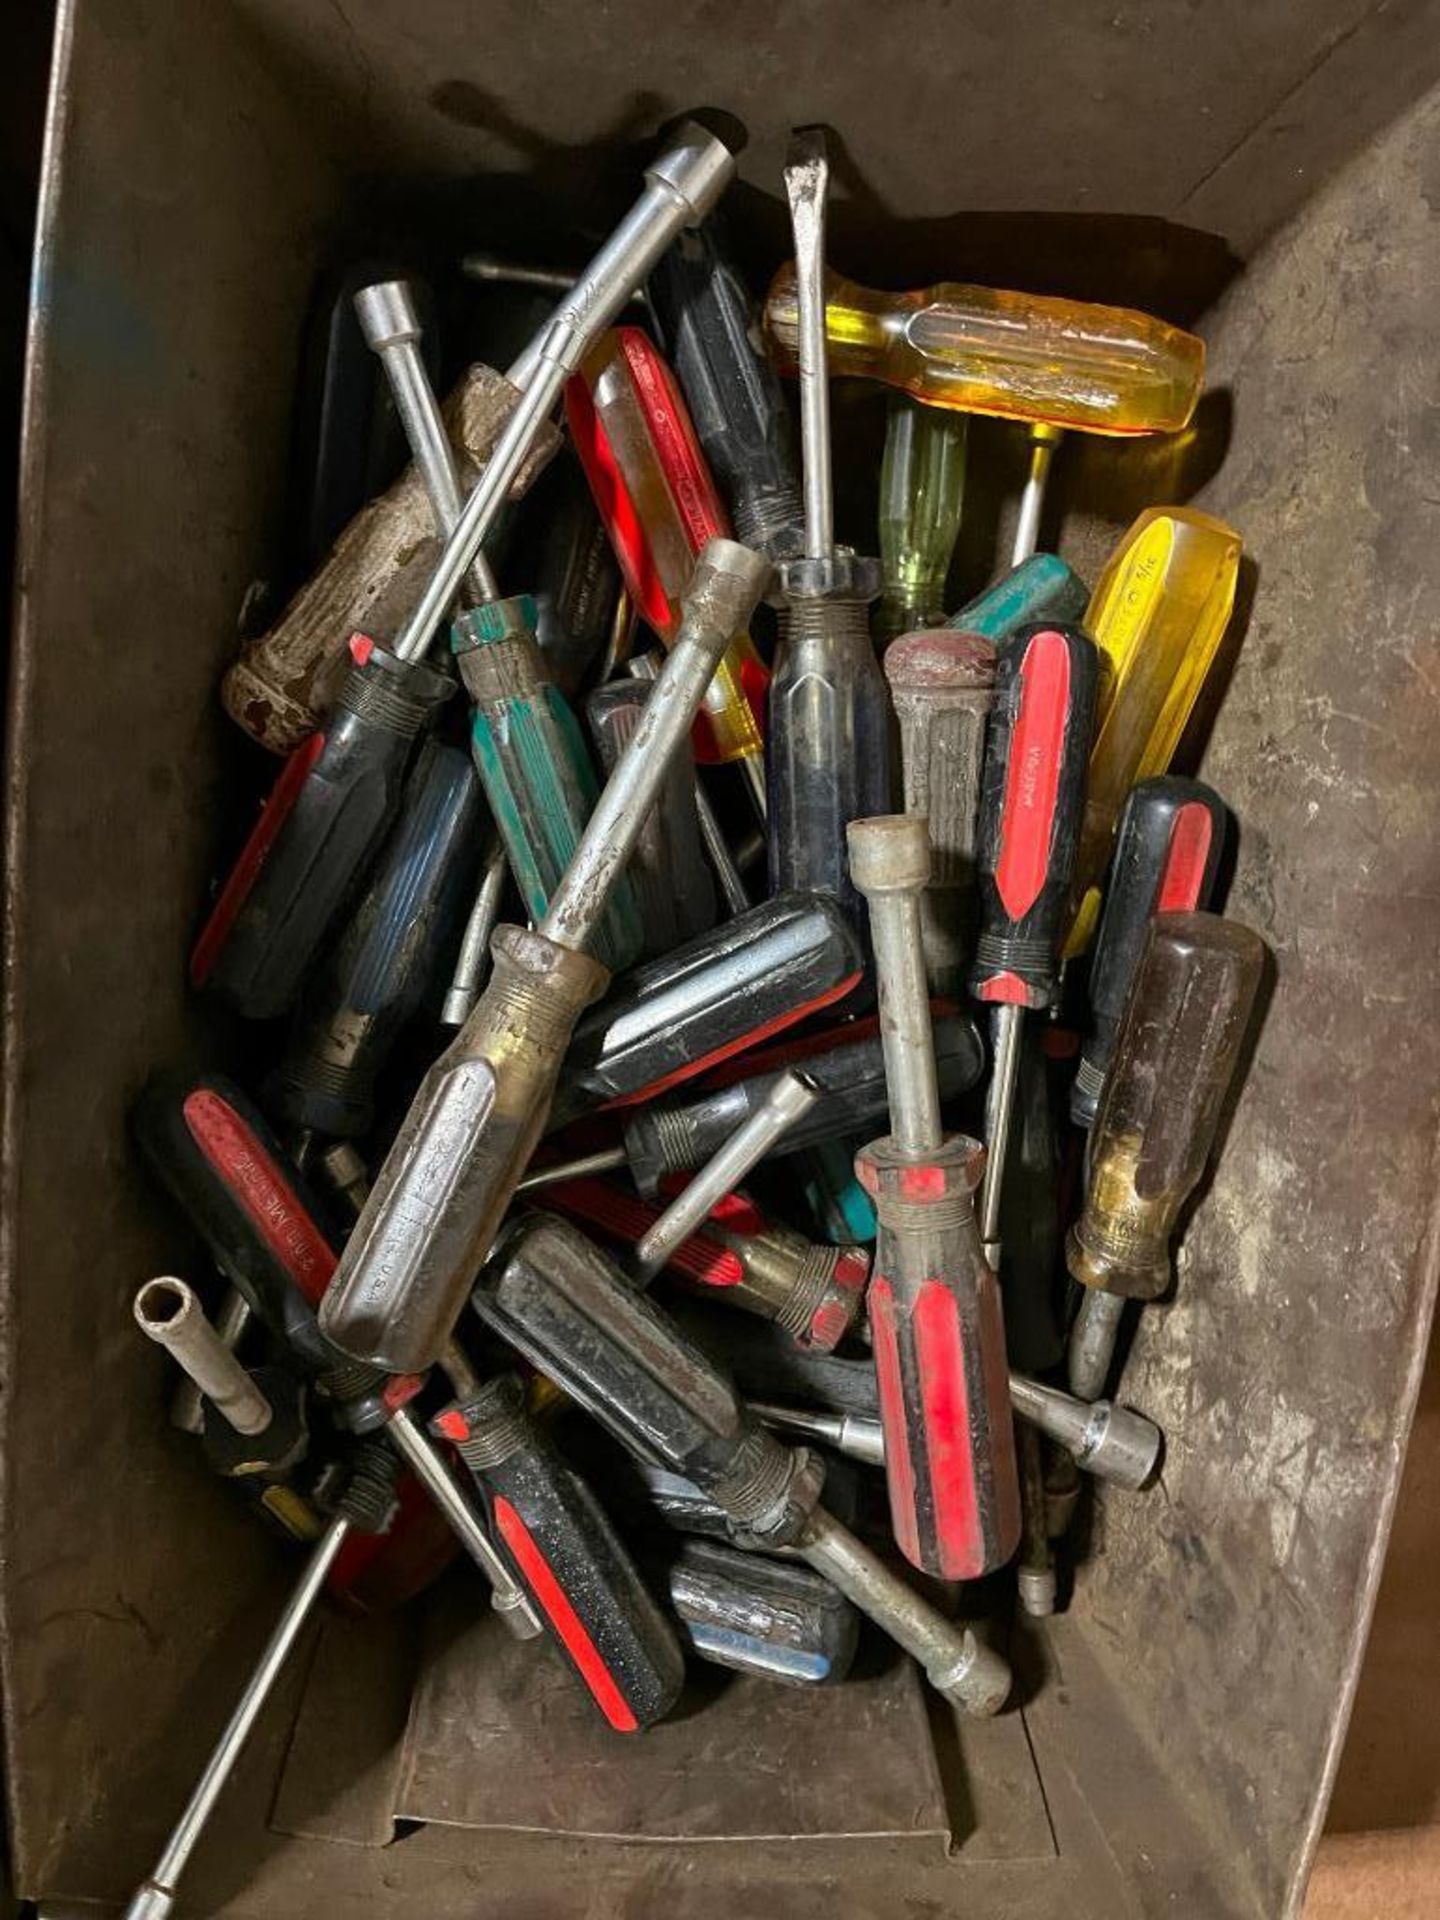 Bin of Wrenches, Varied Sizes